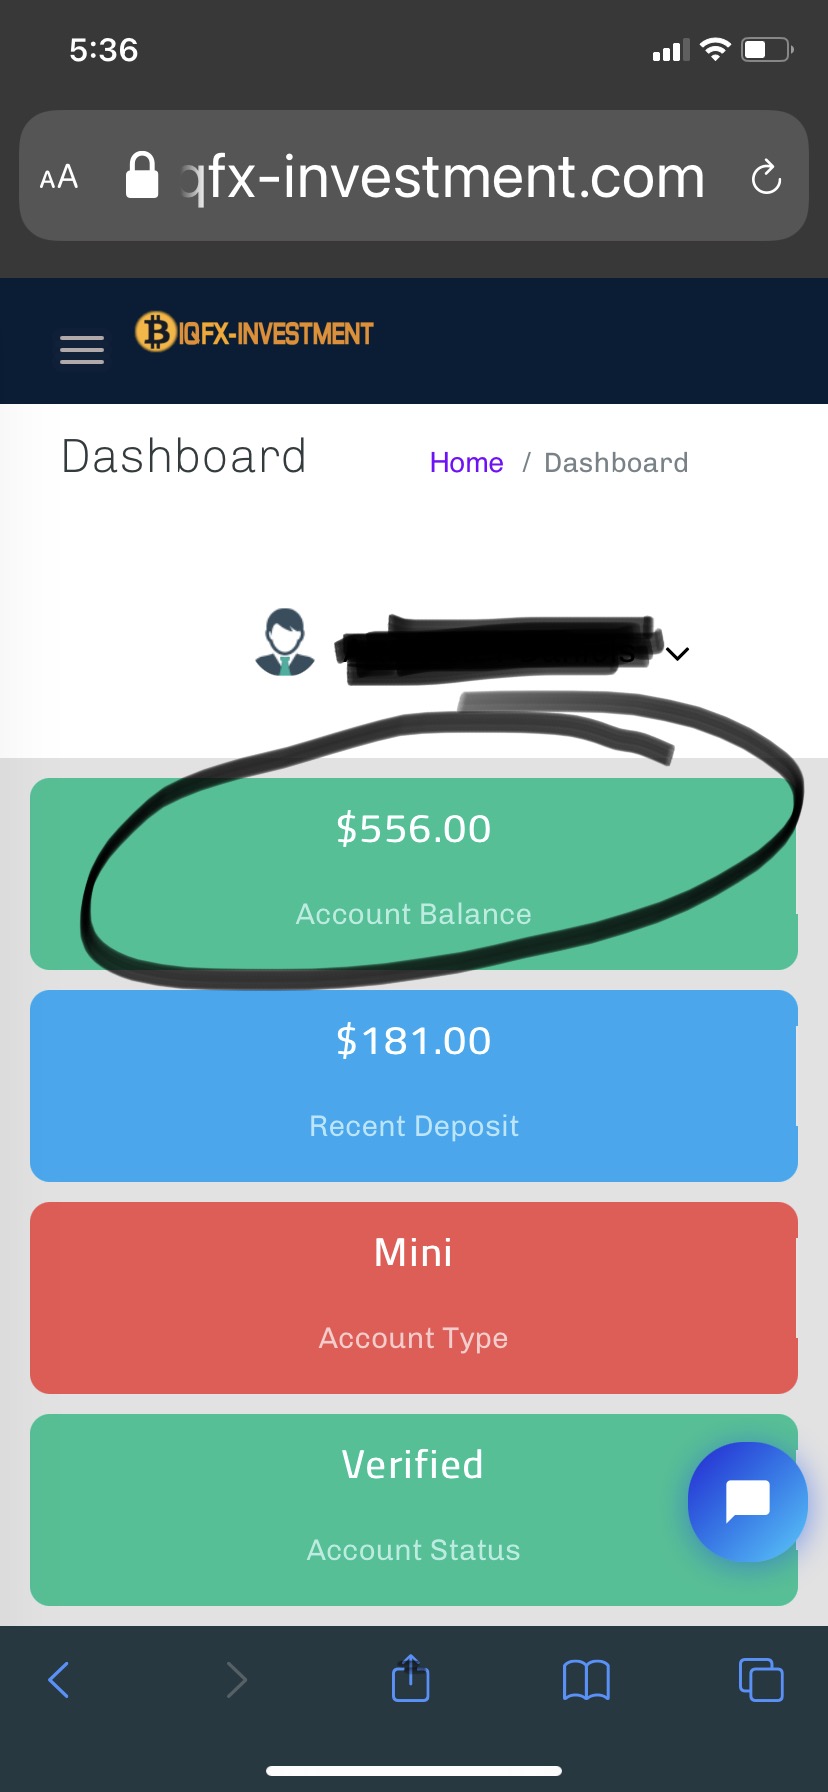 First deposit showing in my acct